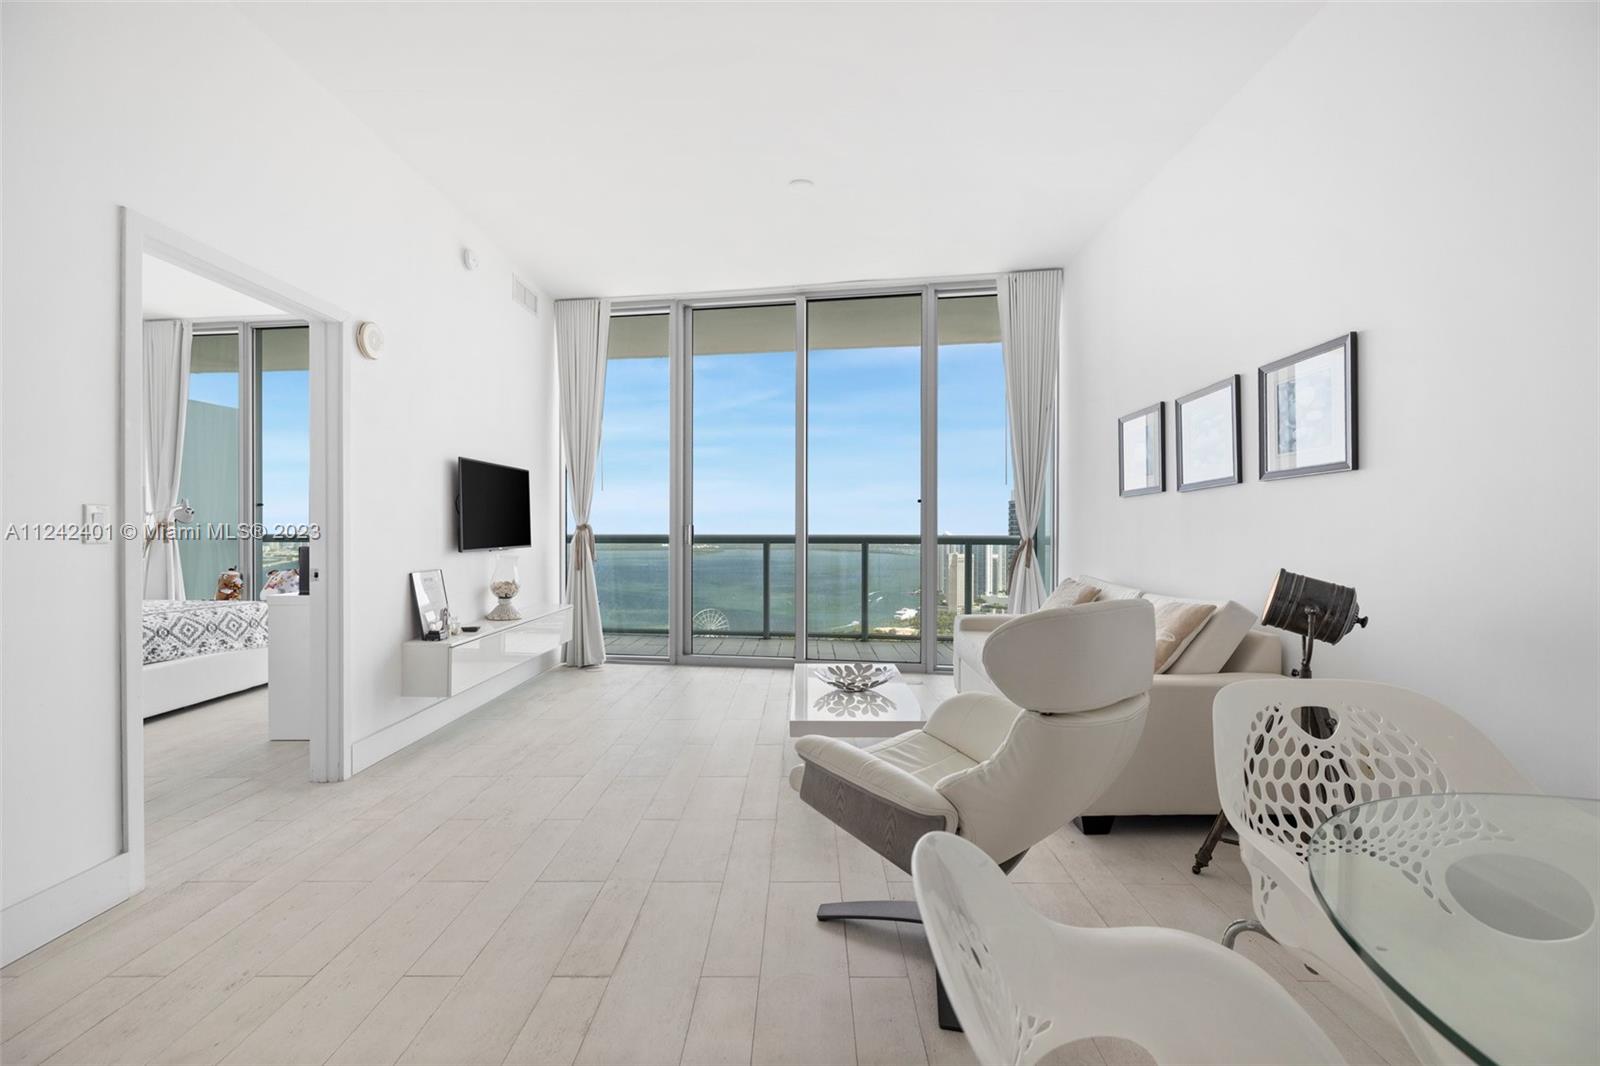 Spectacular 1 Bedroom and 1.5 Bath unit at the MarinaBlue. Enjoy stunning breathtaking panoramic views of Biscayne Bay, Ocean and the Downtown Miami skyline. Unit offers floor to ceiling impact windows with marble and ceramic floors, large balcony, open kitchen with stainless steel appliances and granite countertops. Luxury amenities include 2 pools, Hot Tub, Fitness Center, volleyball, business center, convenience market and more. Just minutes from South Beach, Adrienne Arsht Center, Perez Museum, Wynwood, Design District, Brickell and Midtown. Metro-mover conveniently close. Extra storage on 9th floor. Downtown Miami Living at its finest.